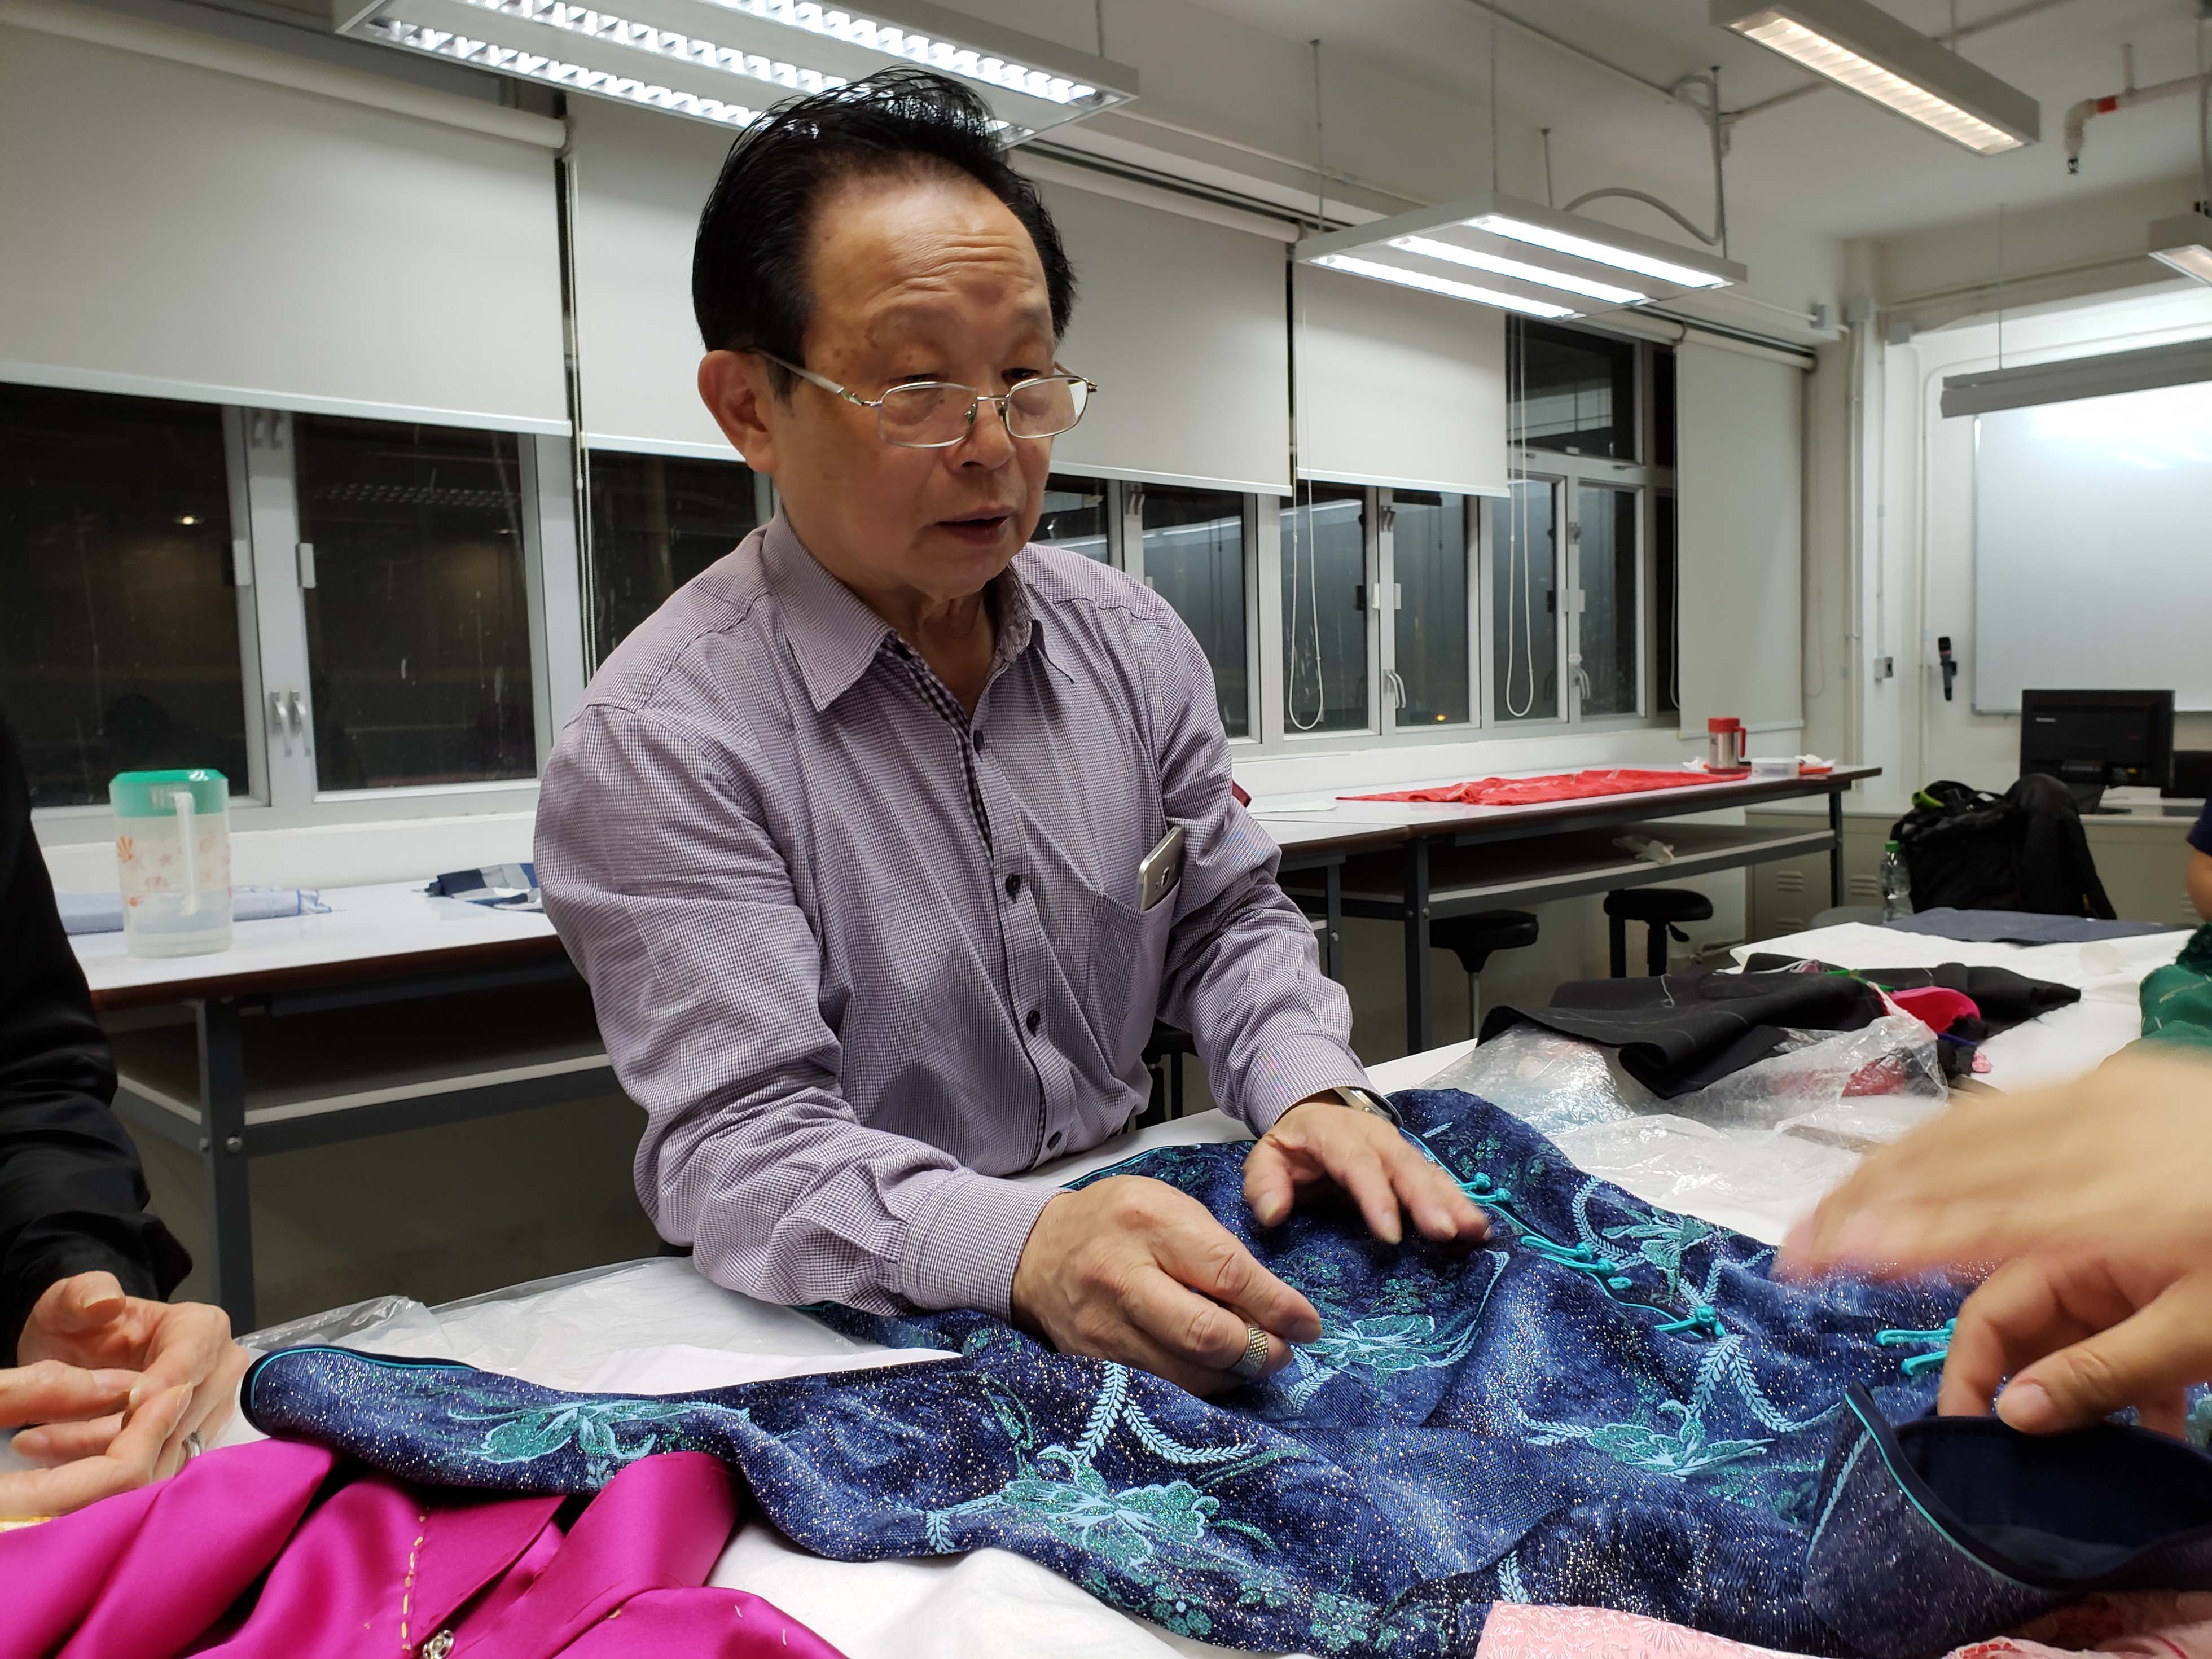 A Snapshot of Introduction to the Making of Traditional Qipao